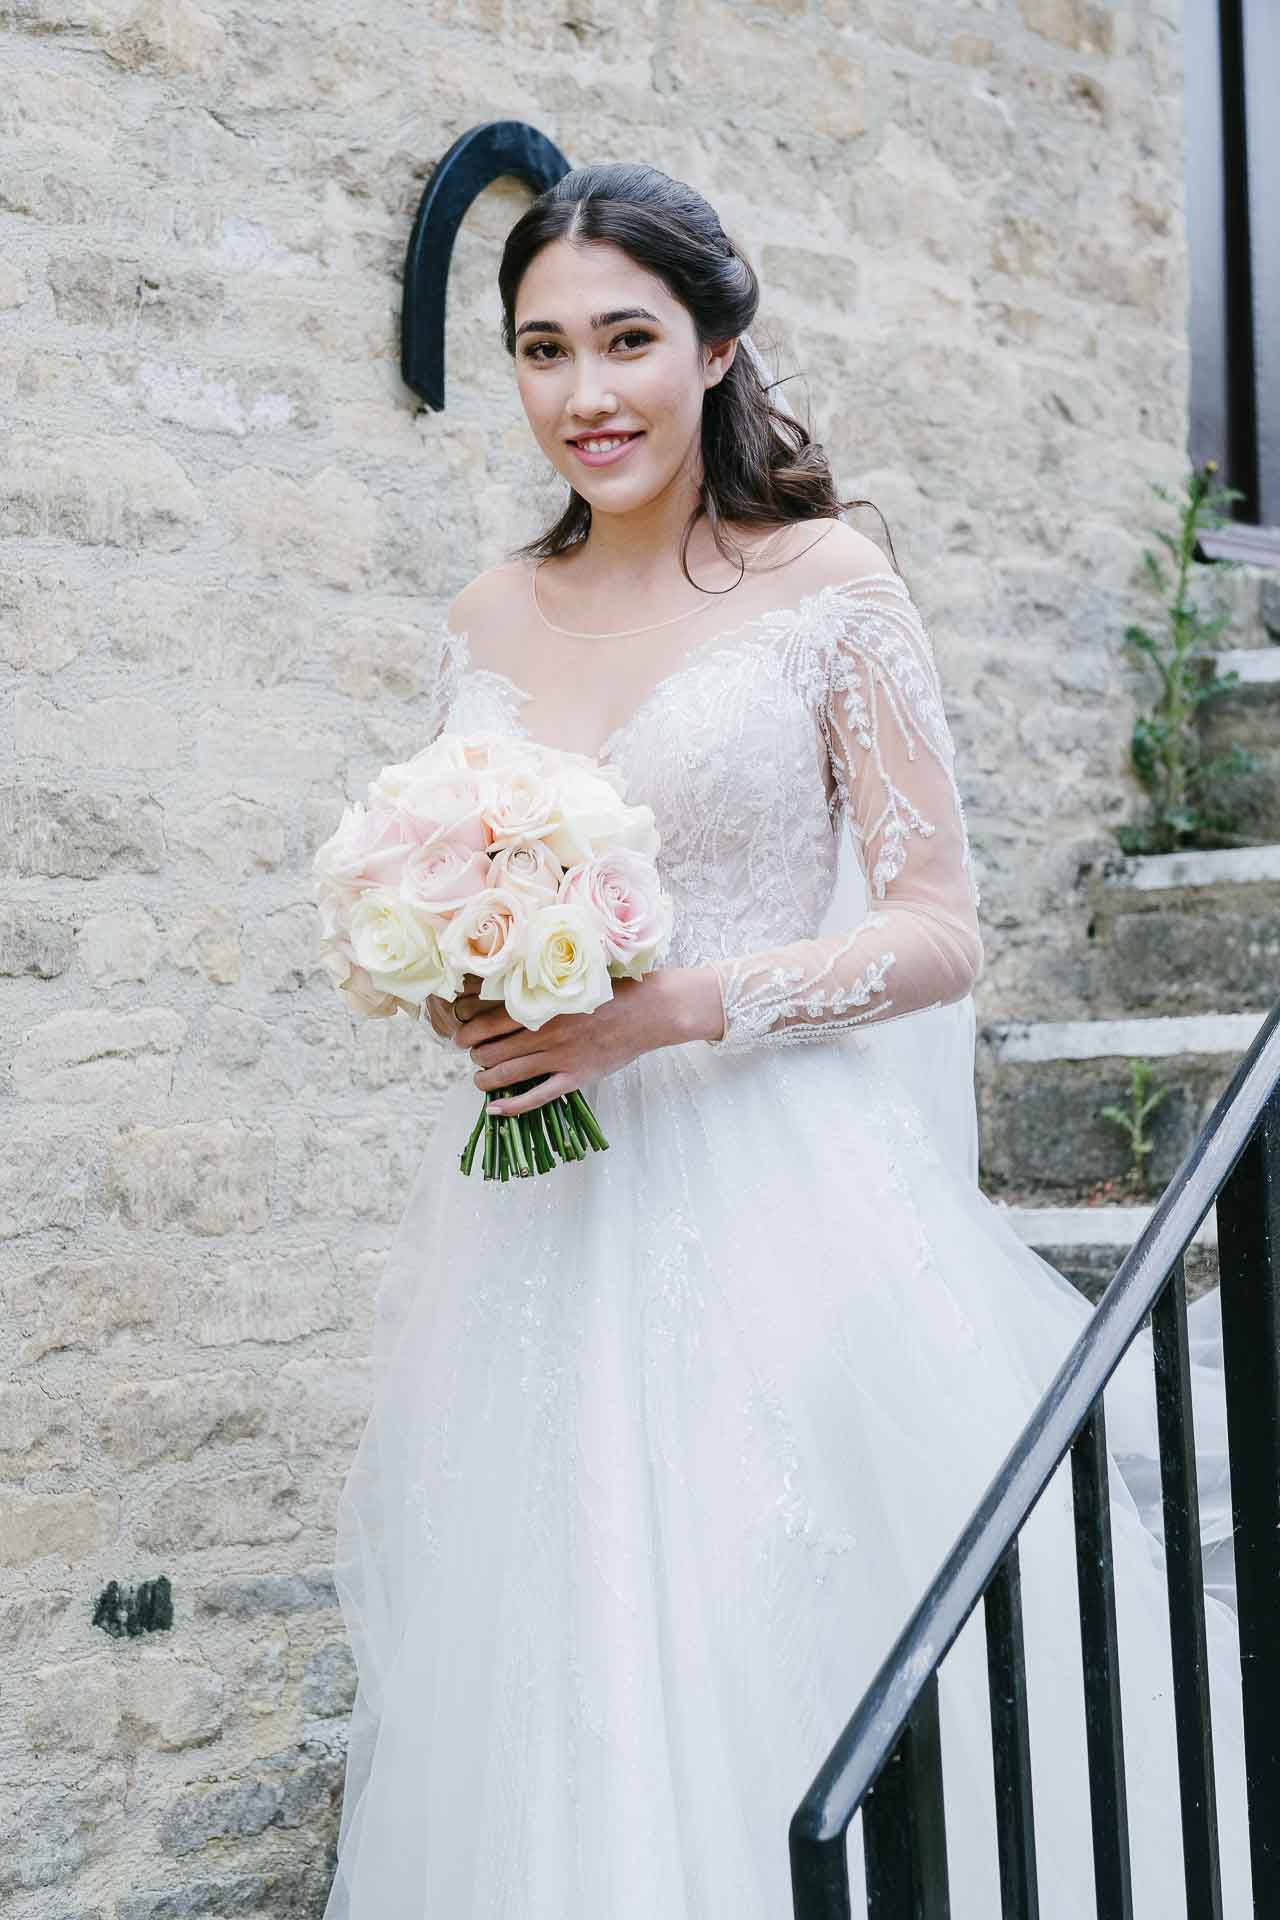 Nadia holding her bouquet in her wedding dress on the steps at Minster Mill. Photography by Des Dubber. Videography by Veiled Productions - fun wedding films